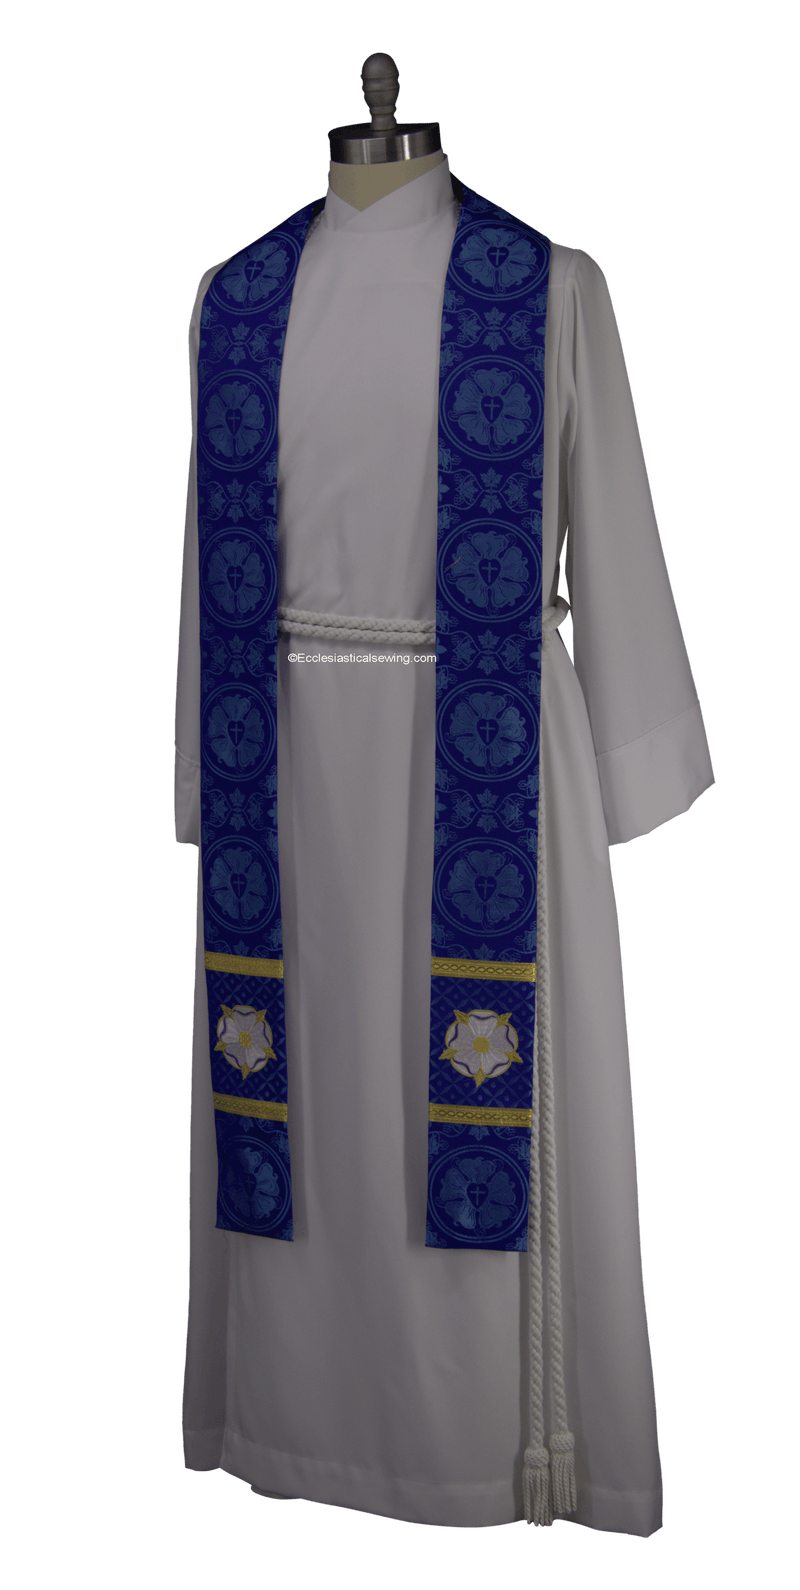 files/messianic-rose-advent-stole-or-advent-pastor-priest-stole-ecclesiastical-sewing-4-31790326677760.png